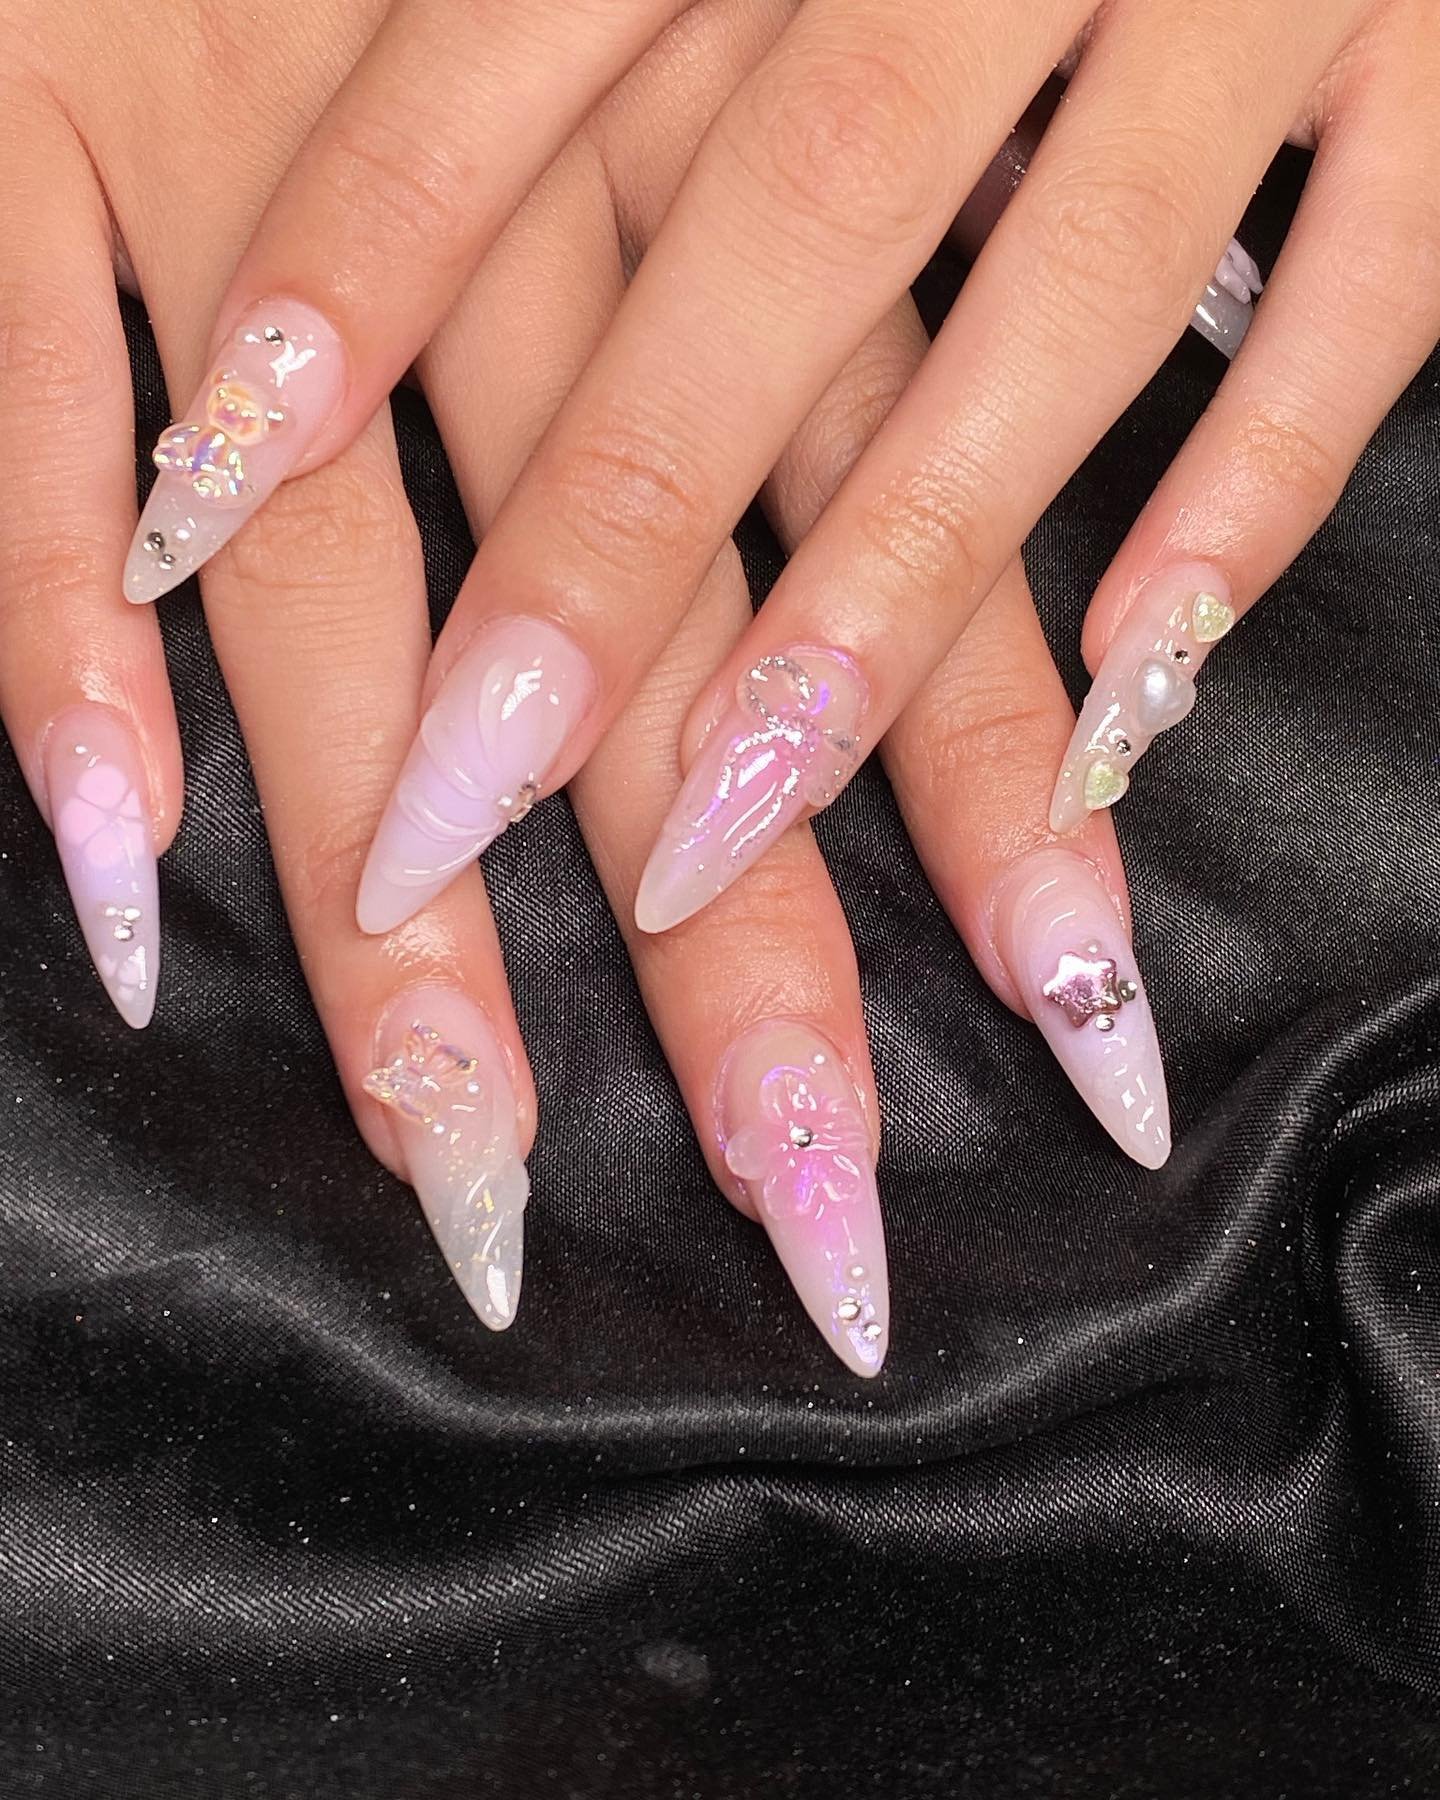 14 - Picture of Acrylic Nails